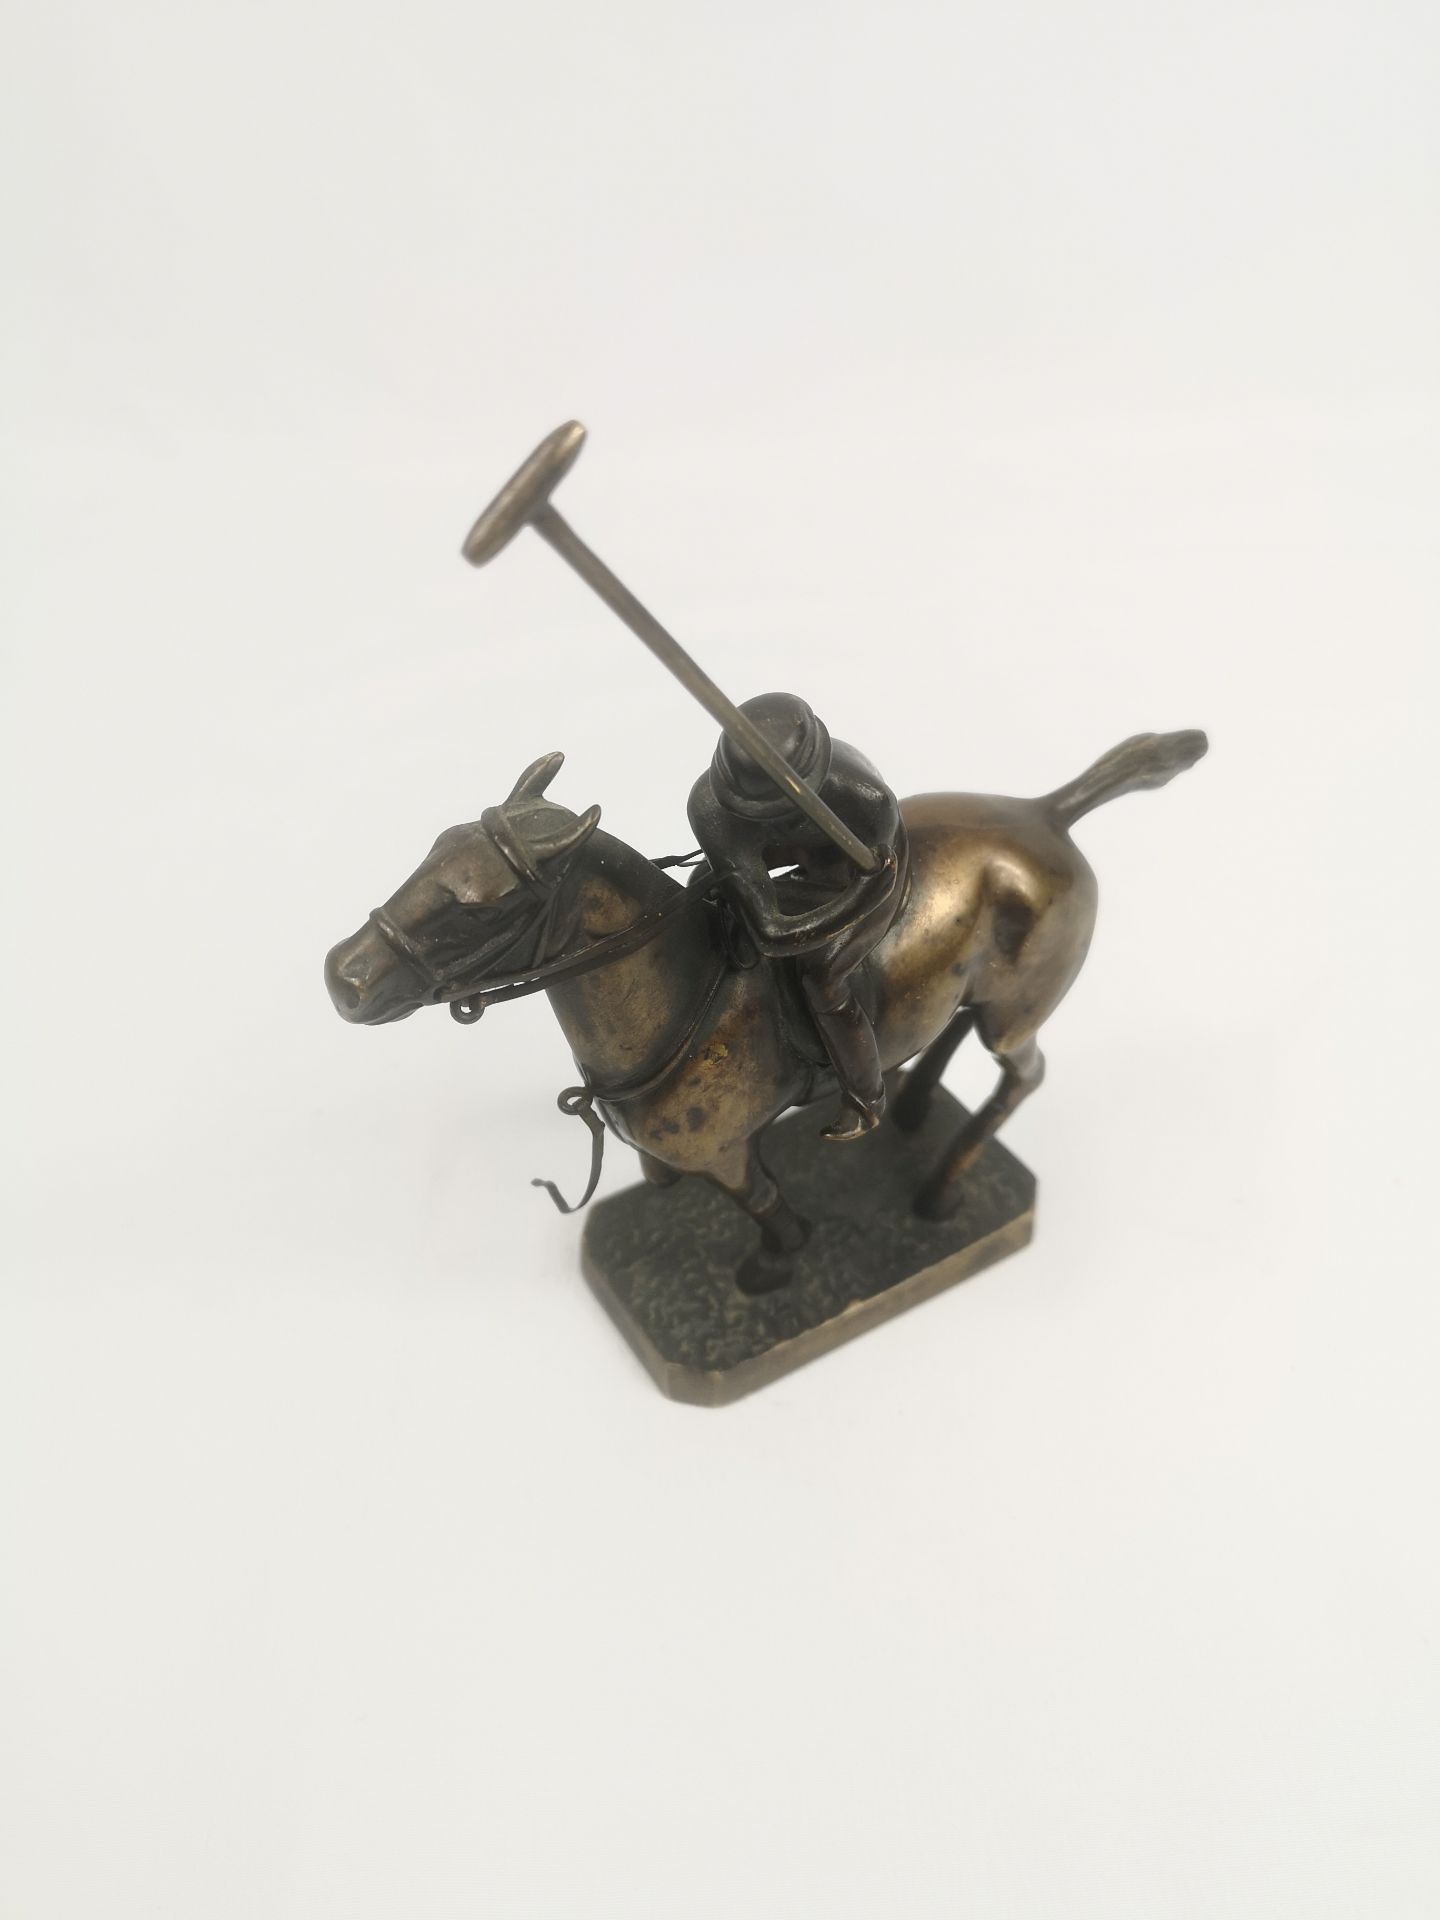 Bronze figurine of a polo player - Image 5 of 5